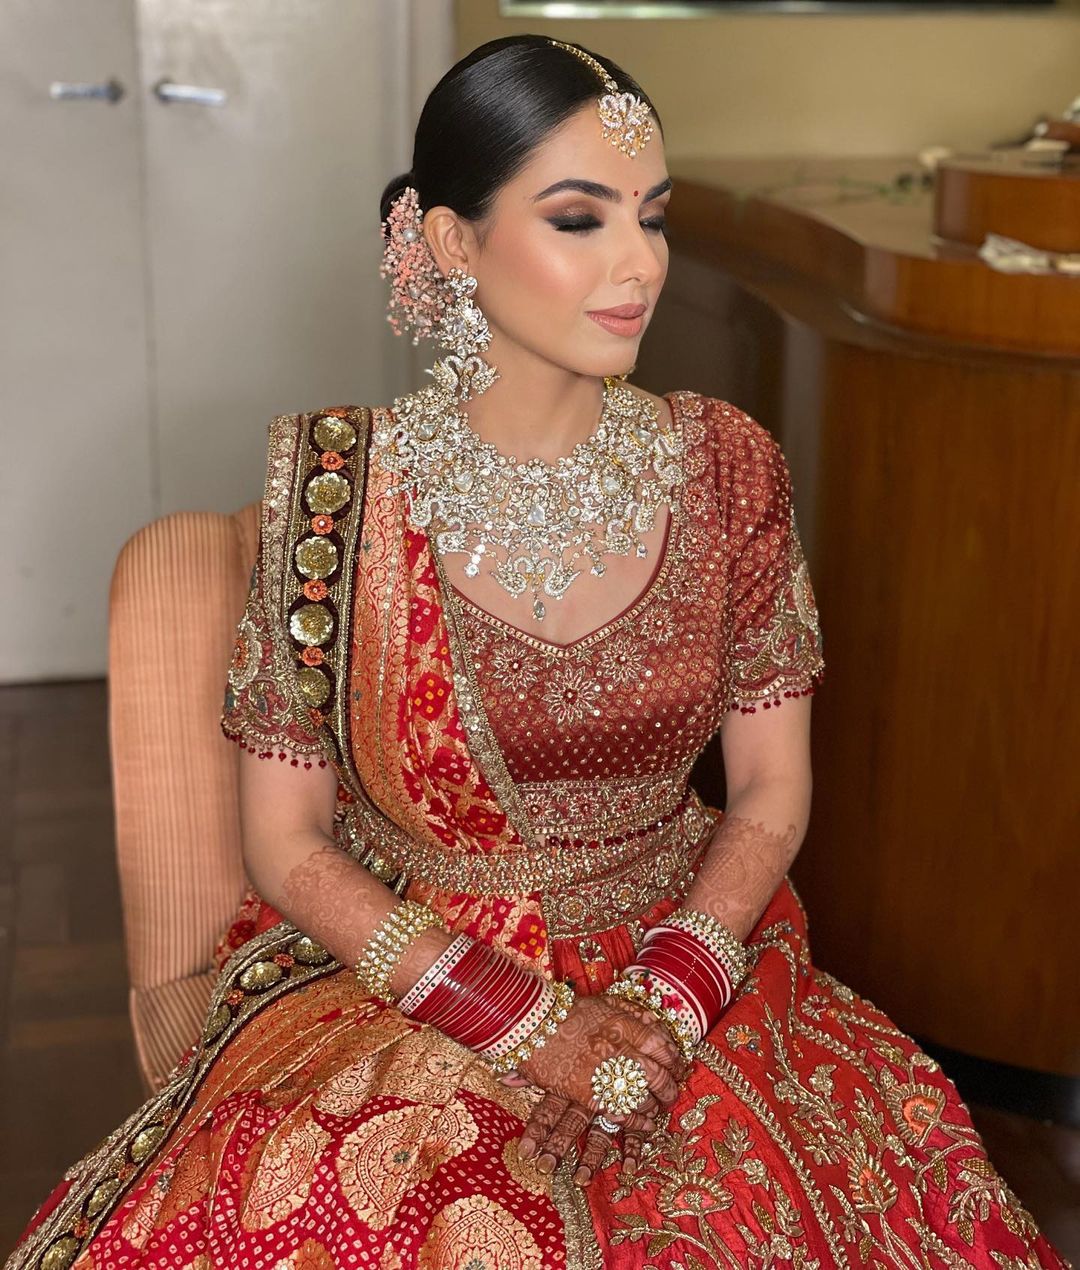 Shruti - A classic red bridal lehenga, exquisite jewellery & a traditional  look, brings back the surreal charm. Bride - Isha Makeup - @shrutiasharma  Hair - @rohithairofficial Outfit - @sabyasachiofficial For Booking ,